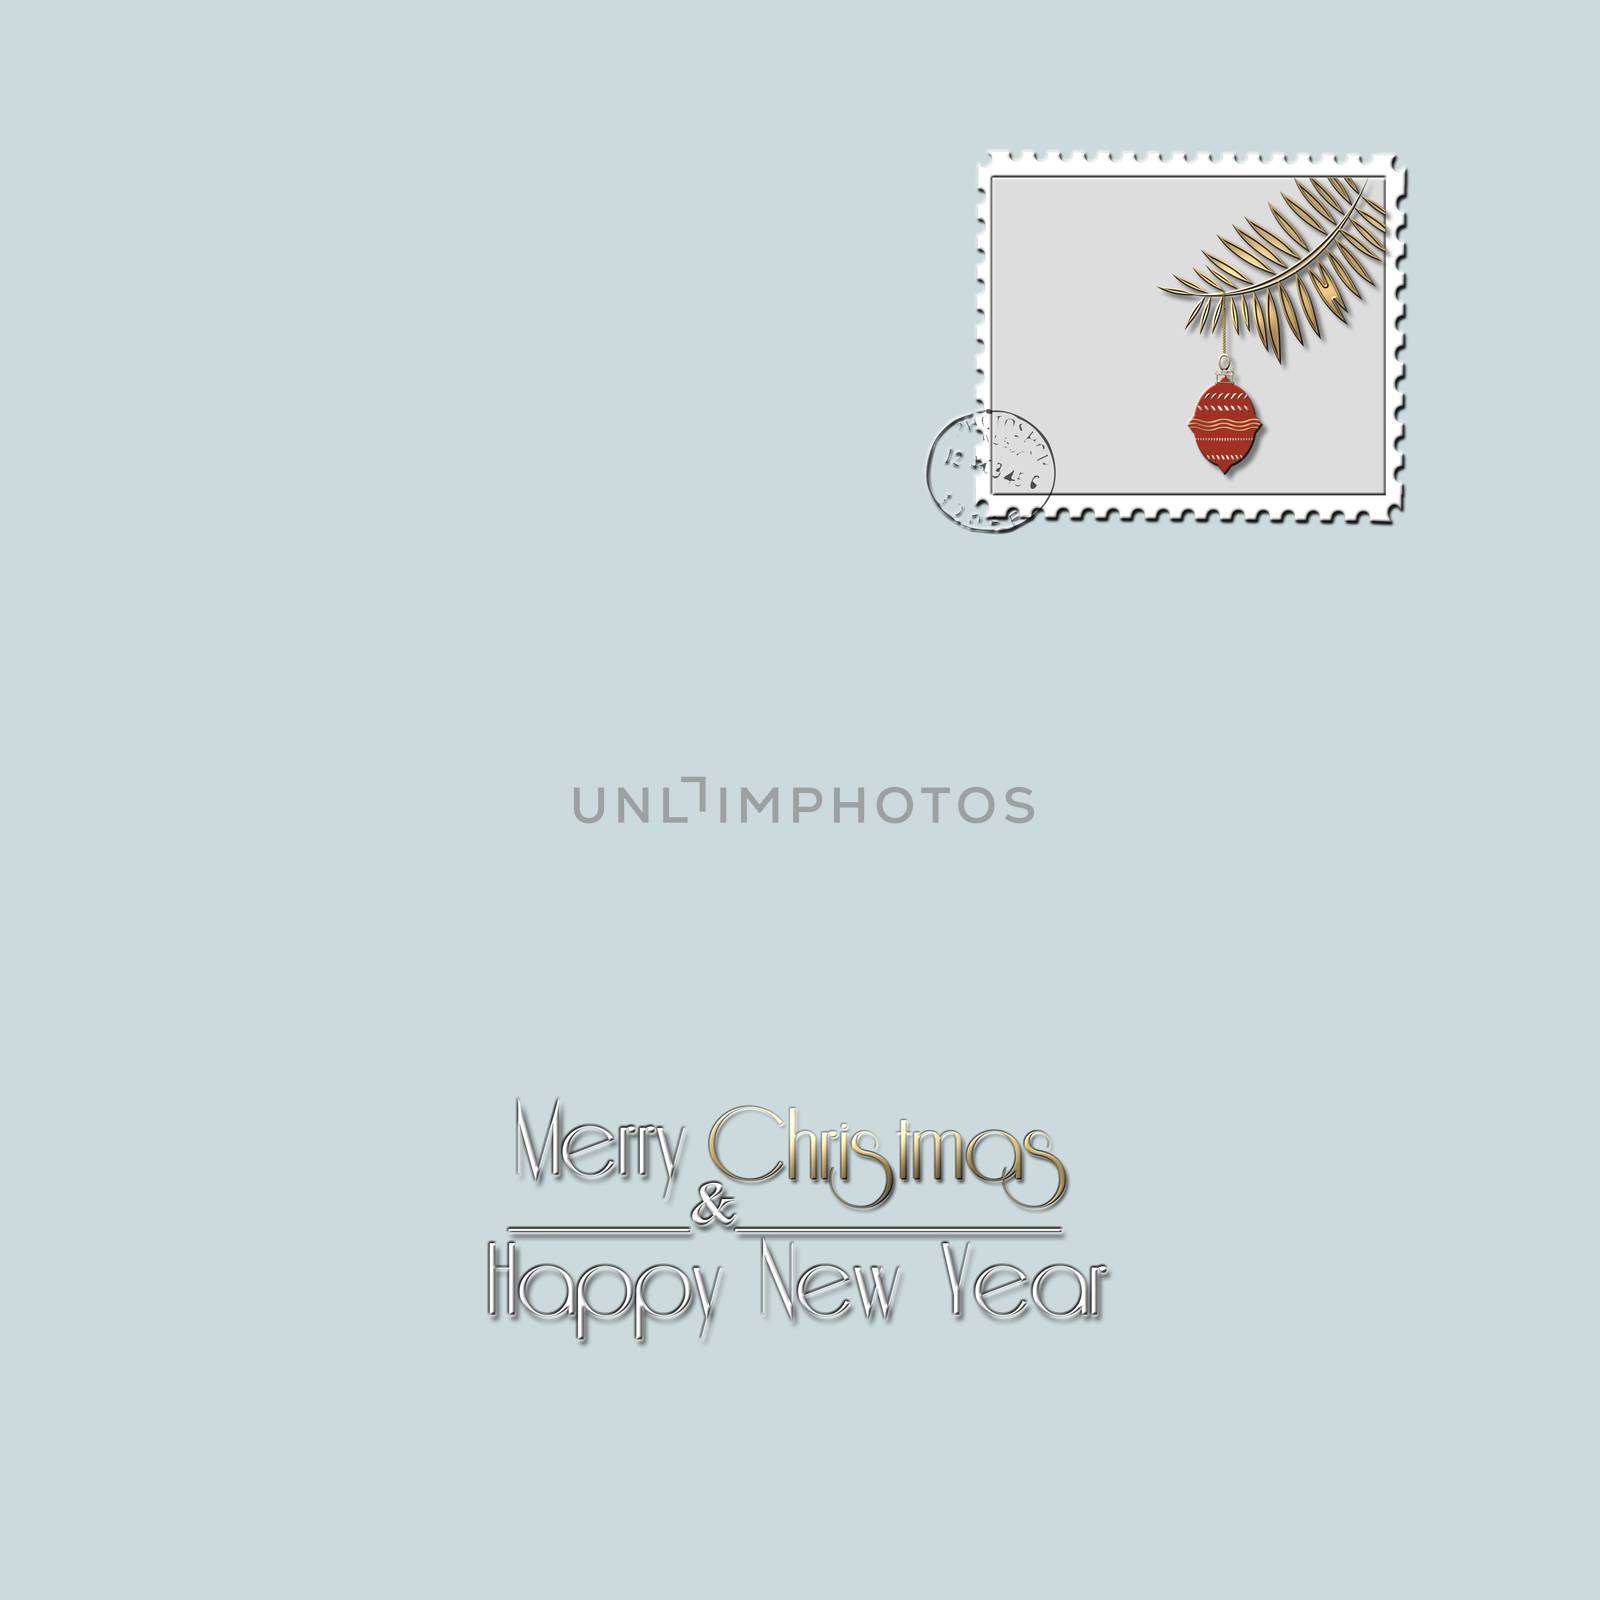 Merry Christmas and New Year card on postage stamp by NelliPolk